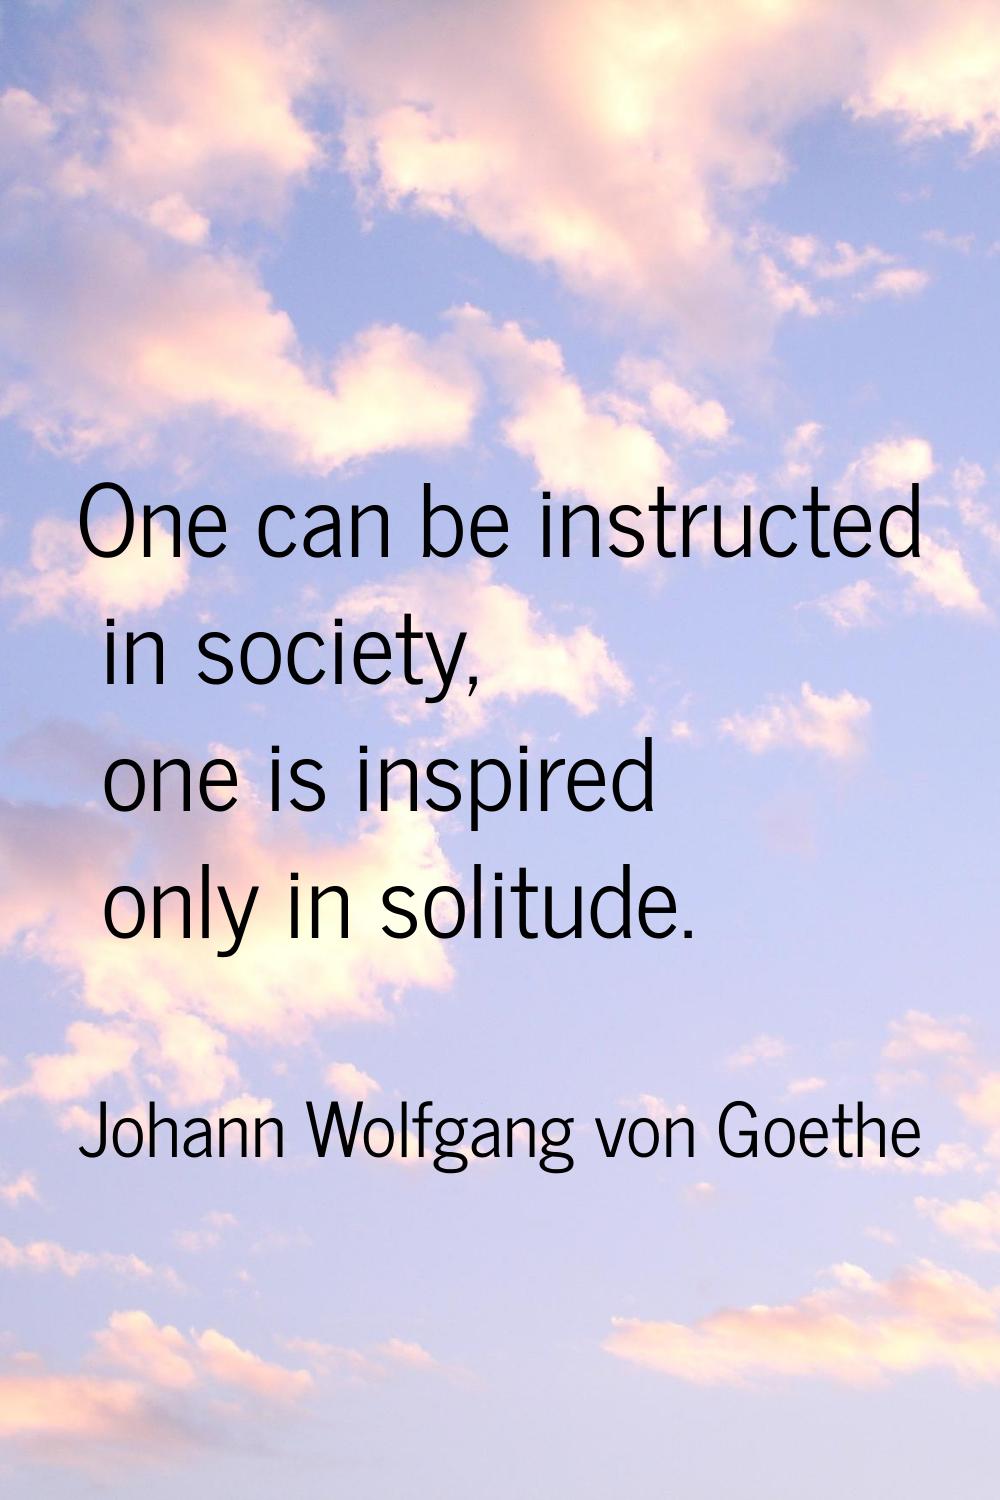 One can be instructed in society, one is inspired only in solitude.